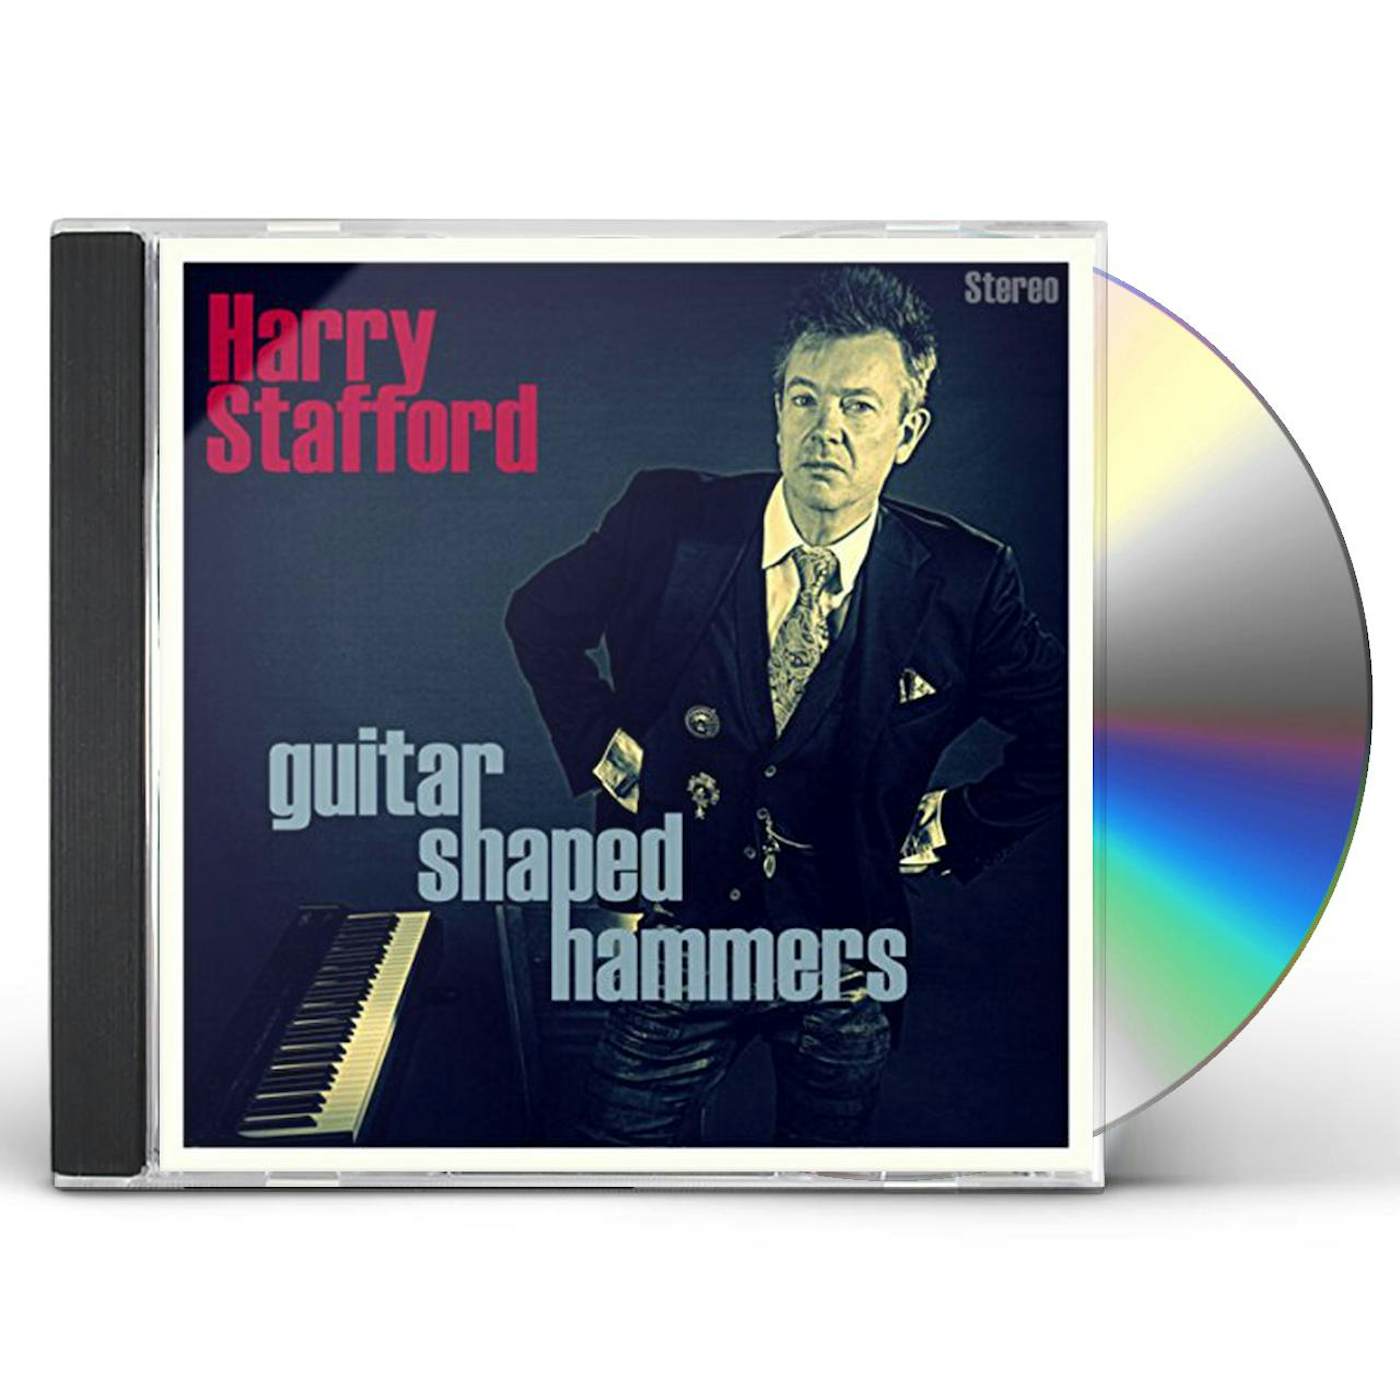 Harry Stafford GUITAR SHAPED HAMMERS CD